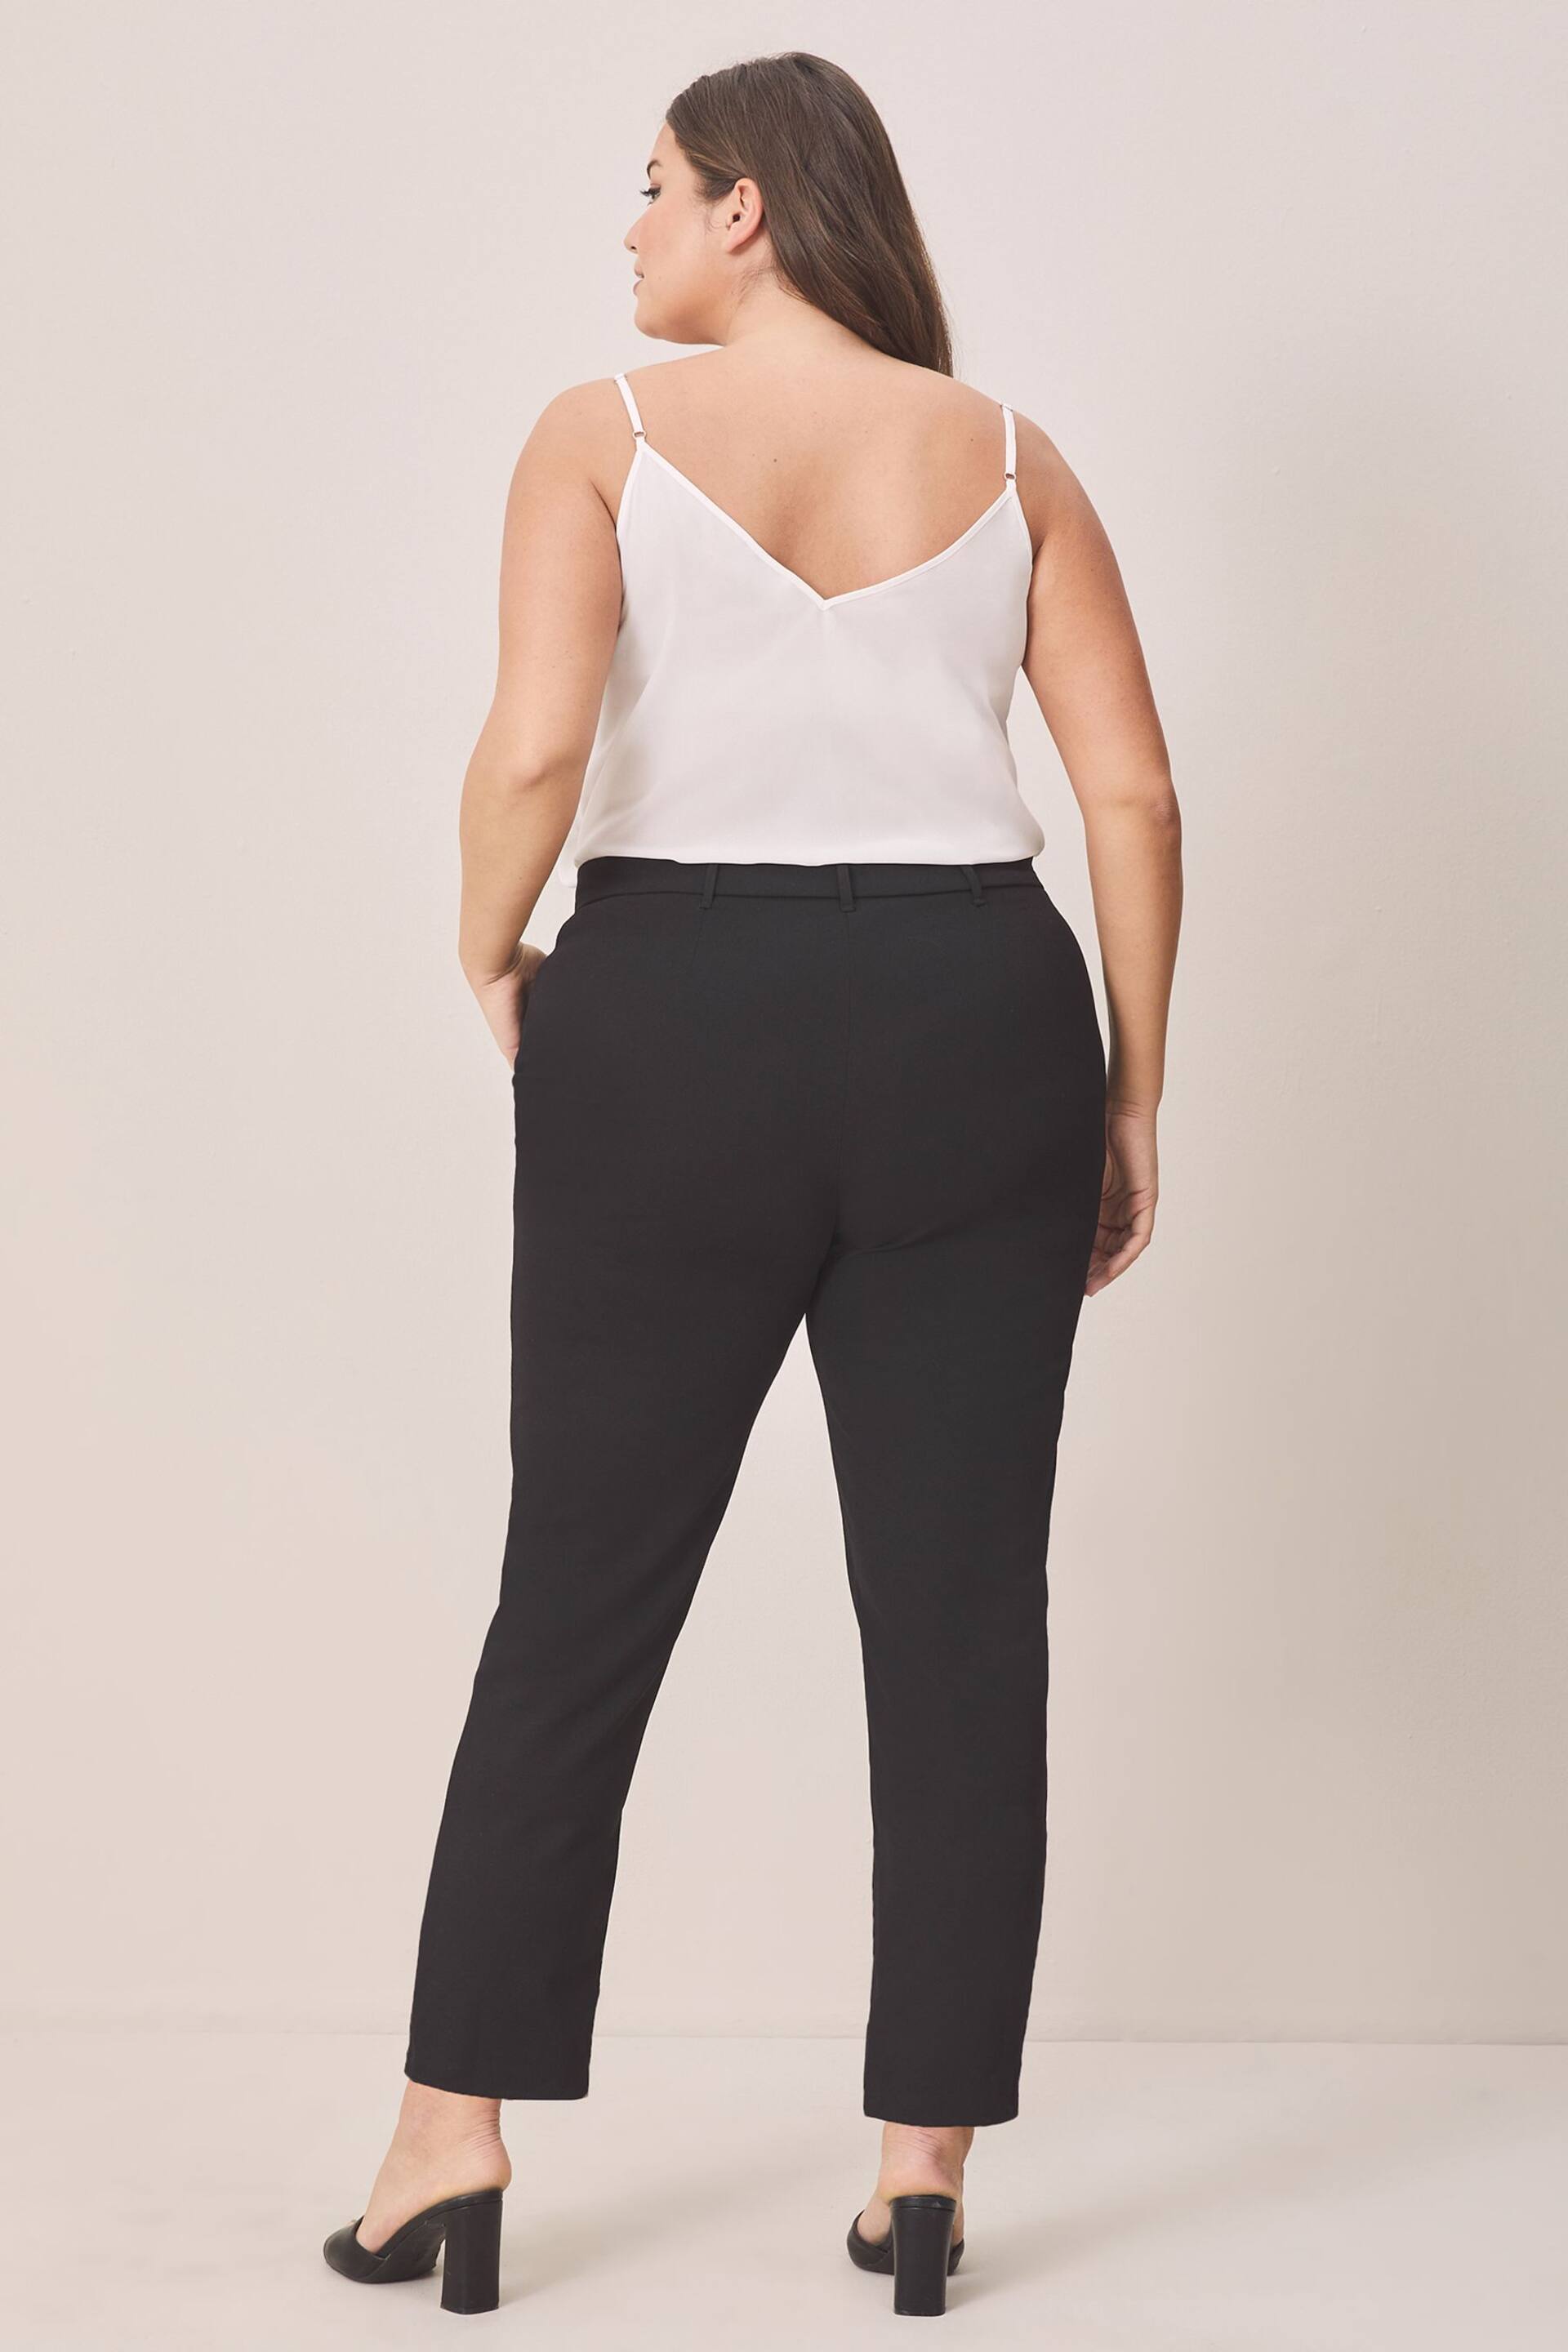 Lipsy Black Curve Smart Tapered Trouser - Image 3 of 4